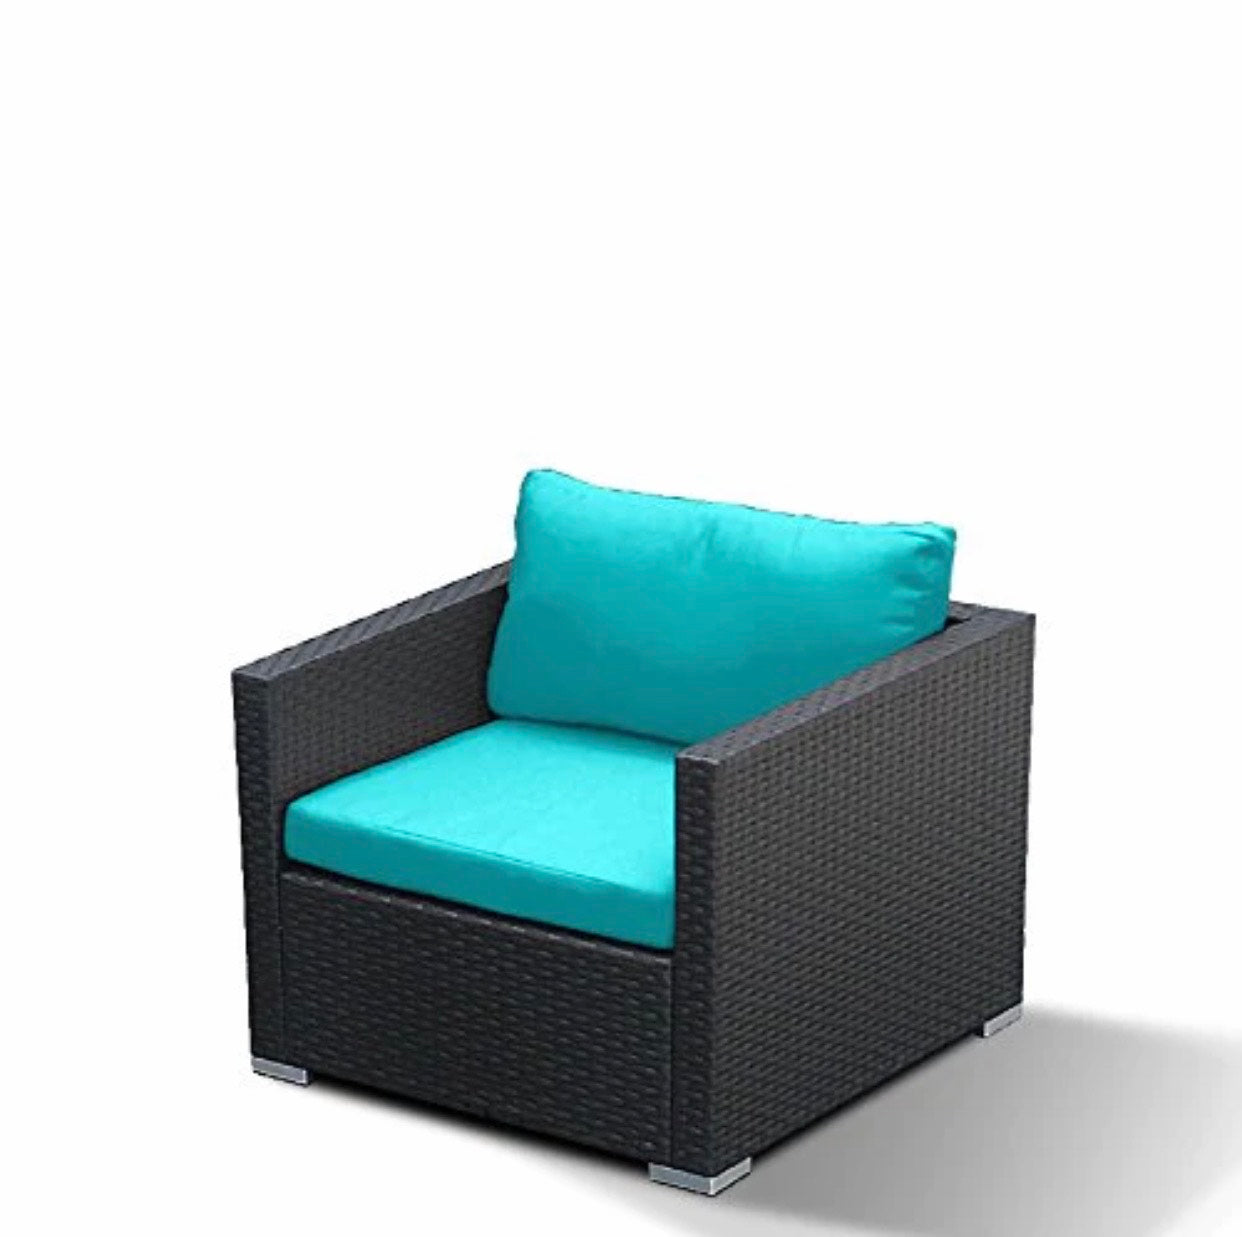 Blue Turquoise Club Chair Outdoor Patio Furniture Espresso Brown Wicker